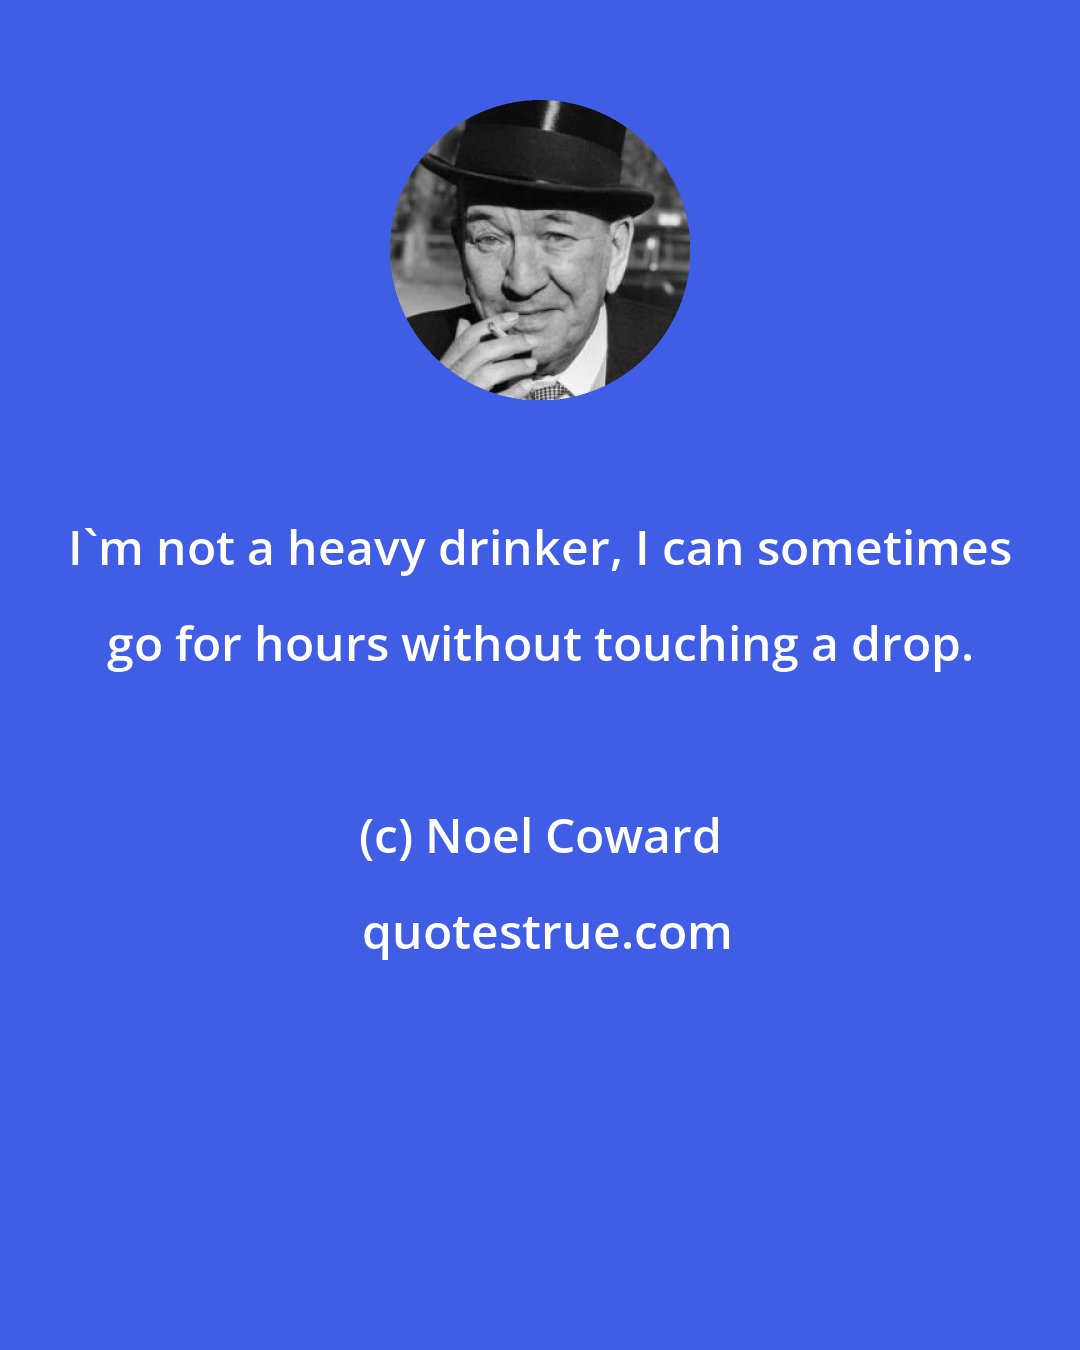 Noel Coward: I'm not a heavy drinker, I can sometimes go for hours without touching a drop.